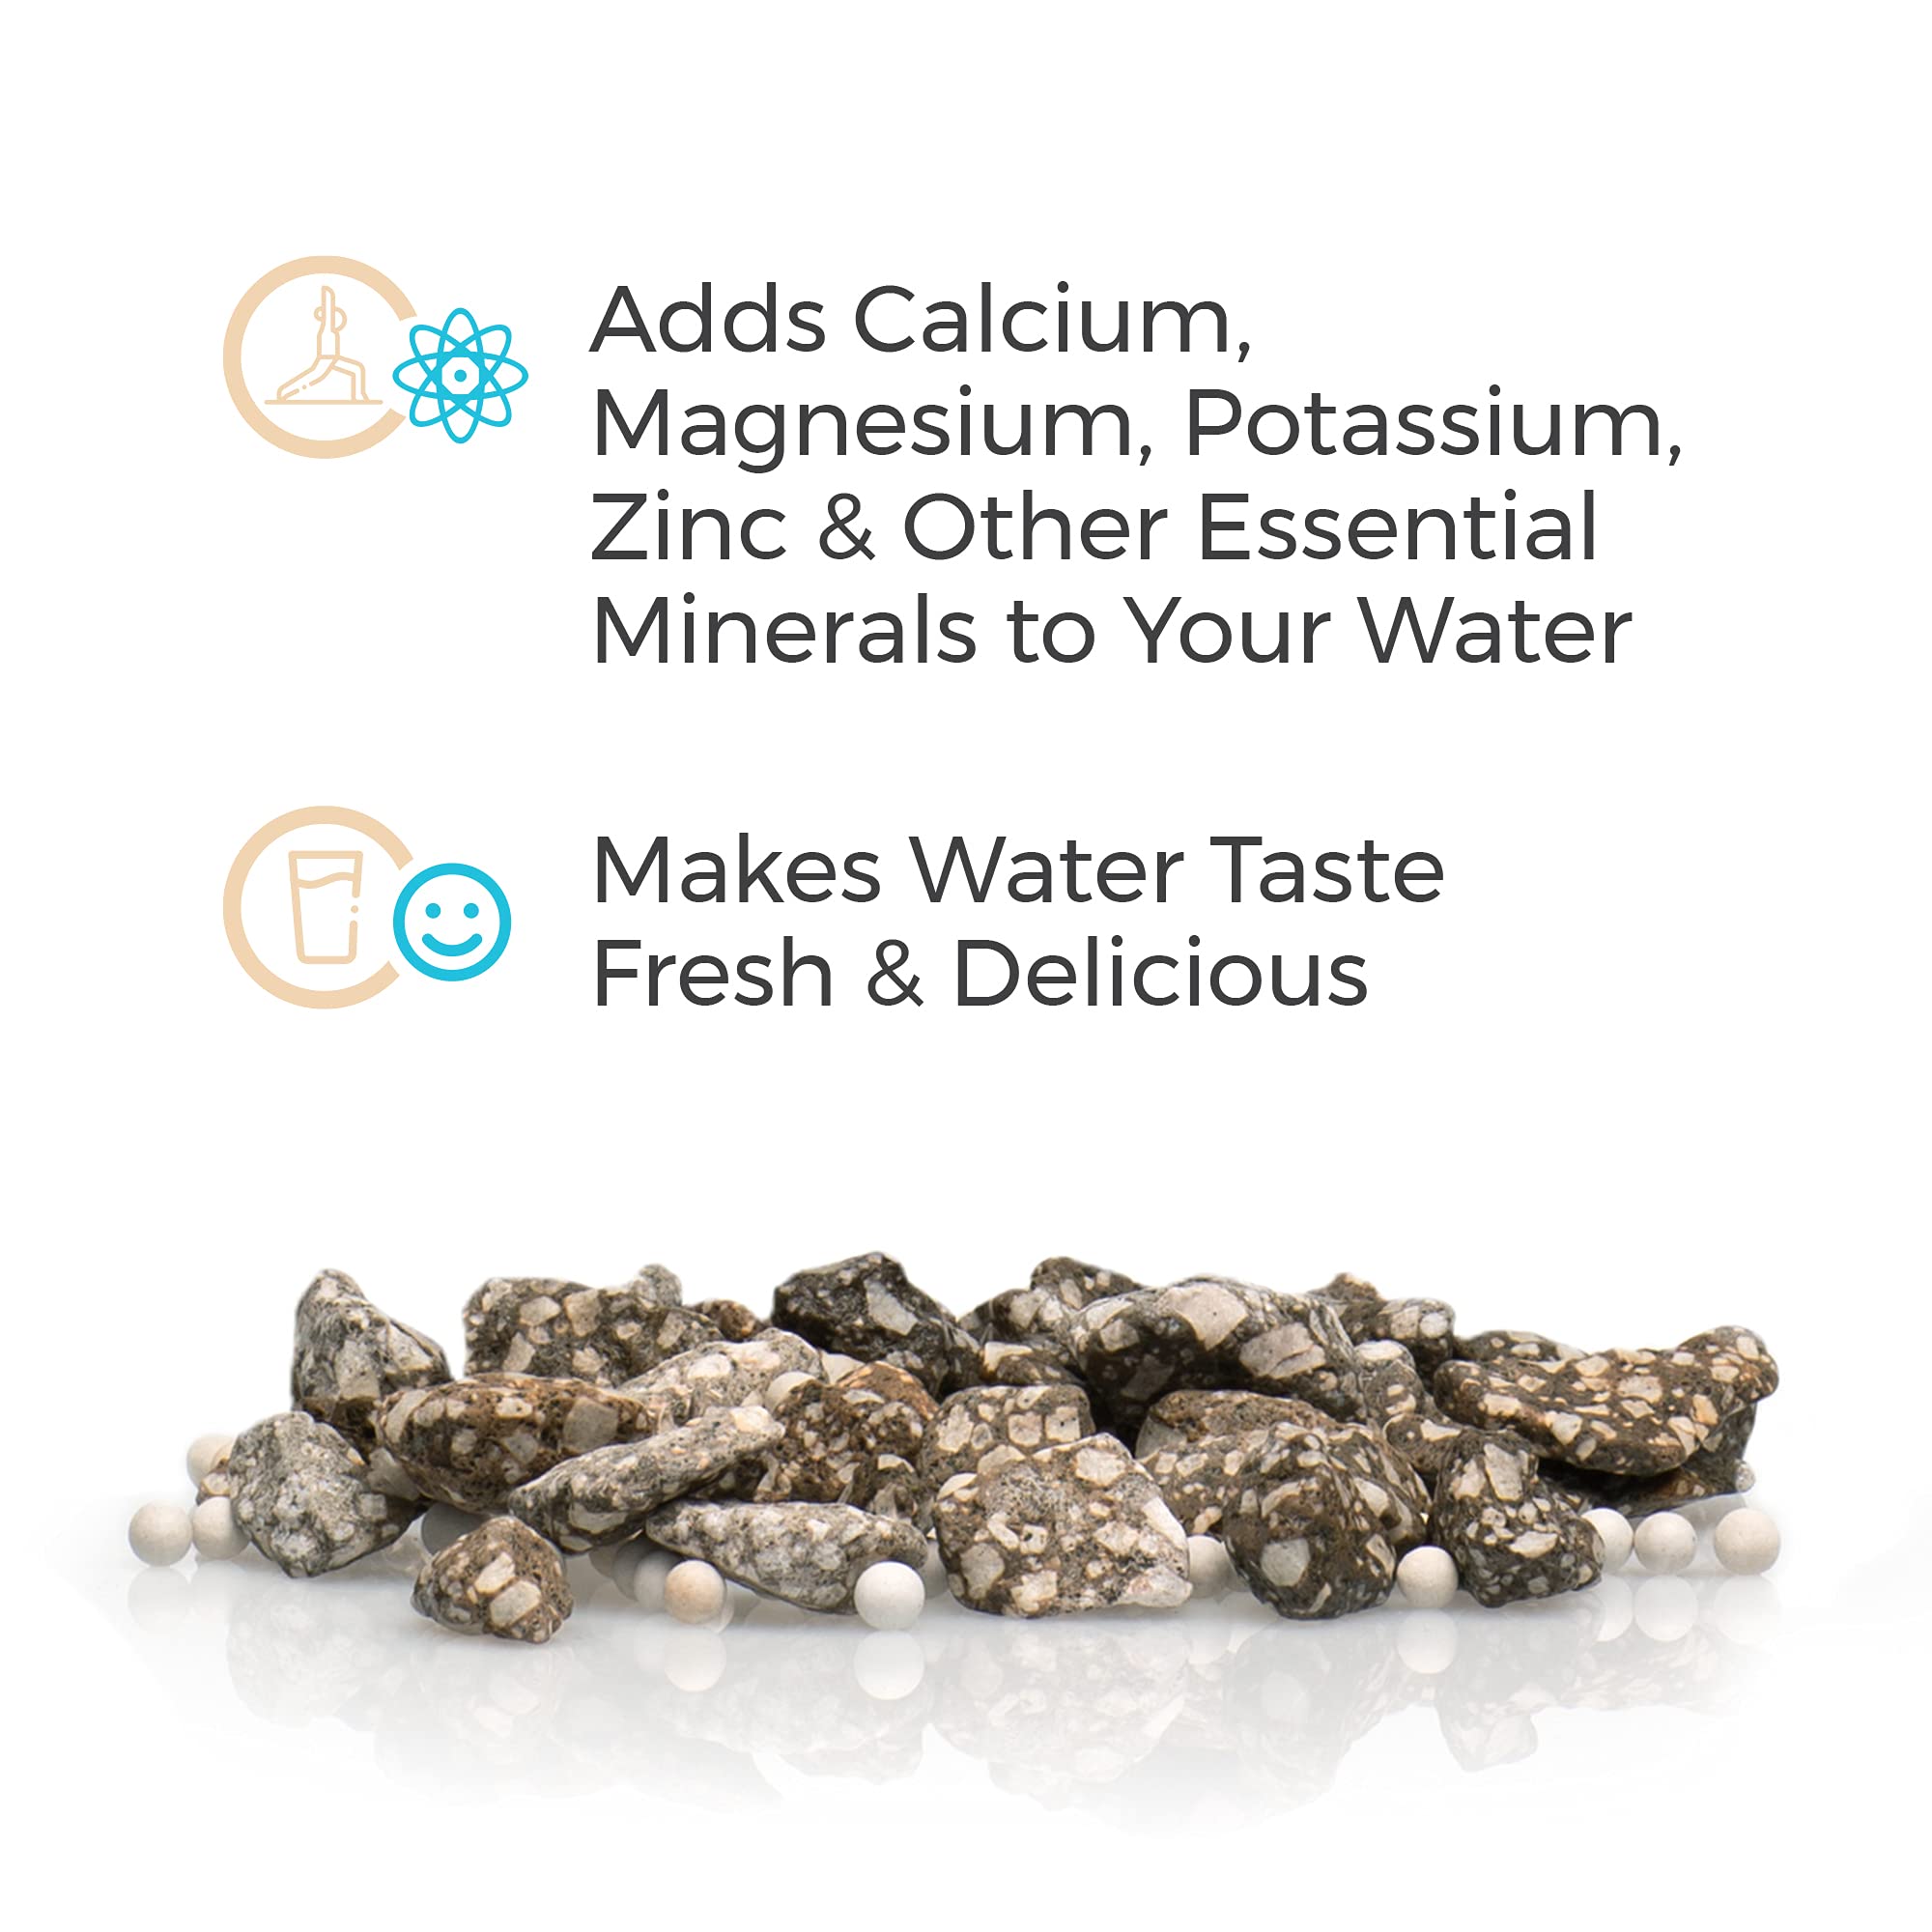 Mineral Stones Replacement by Santevia | Designed for Santevia's Gravity Water System | Adds Healthy Minerals and Makes Water Alkaline | Makes Water Taste Delicious